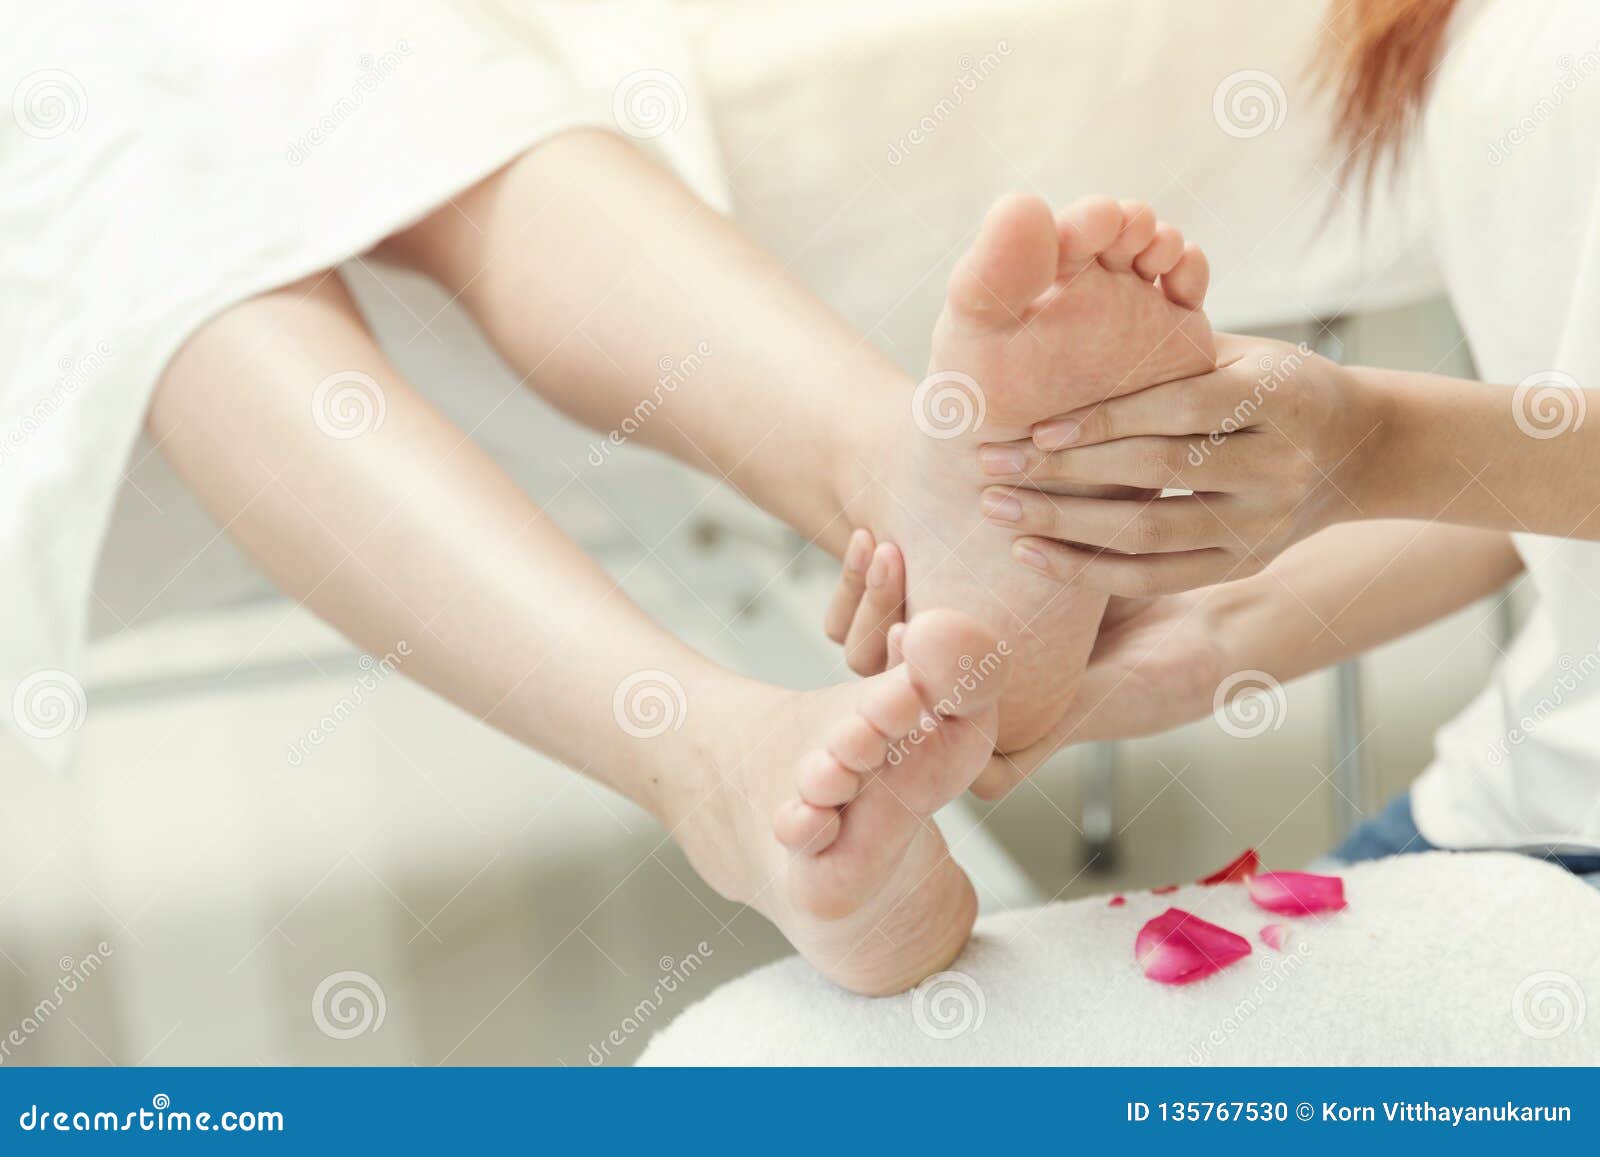 Foot Massage In Spa Stock Photo Image Of Female Girl 1